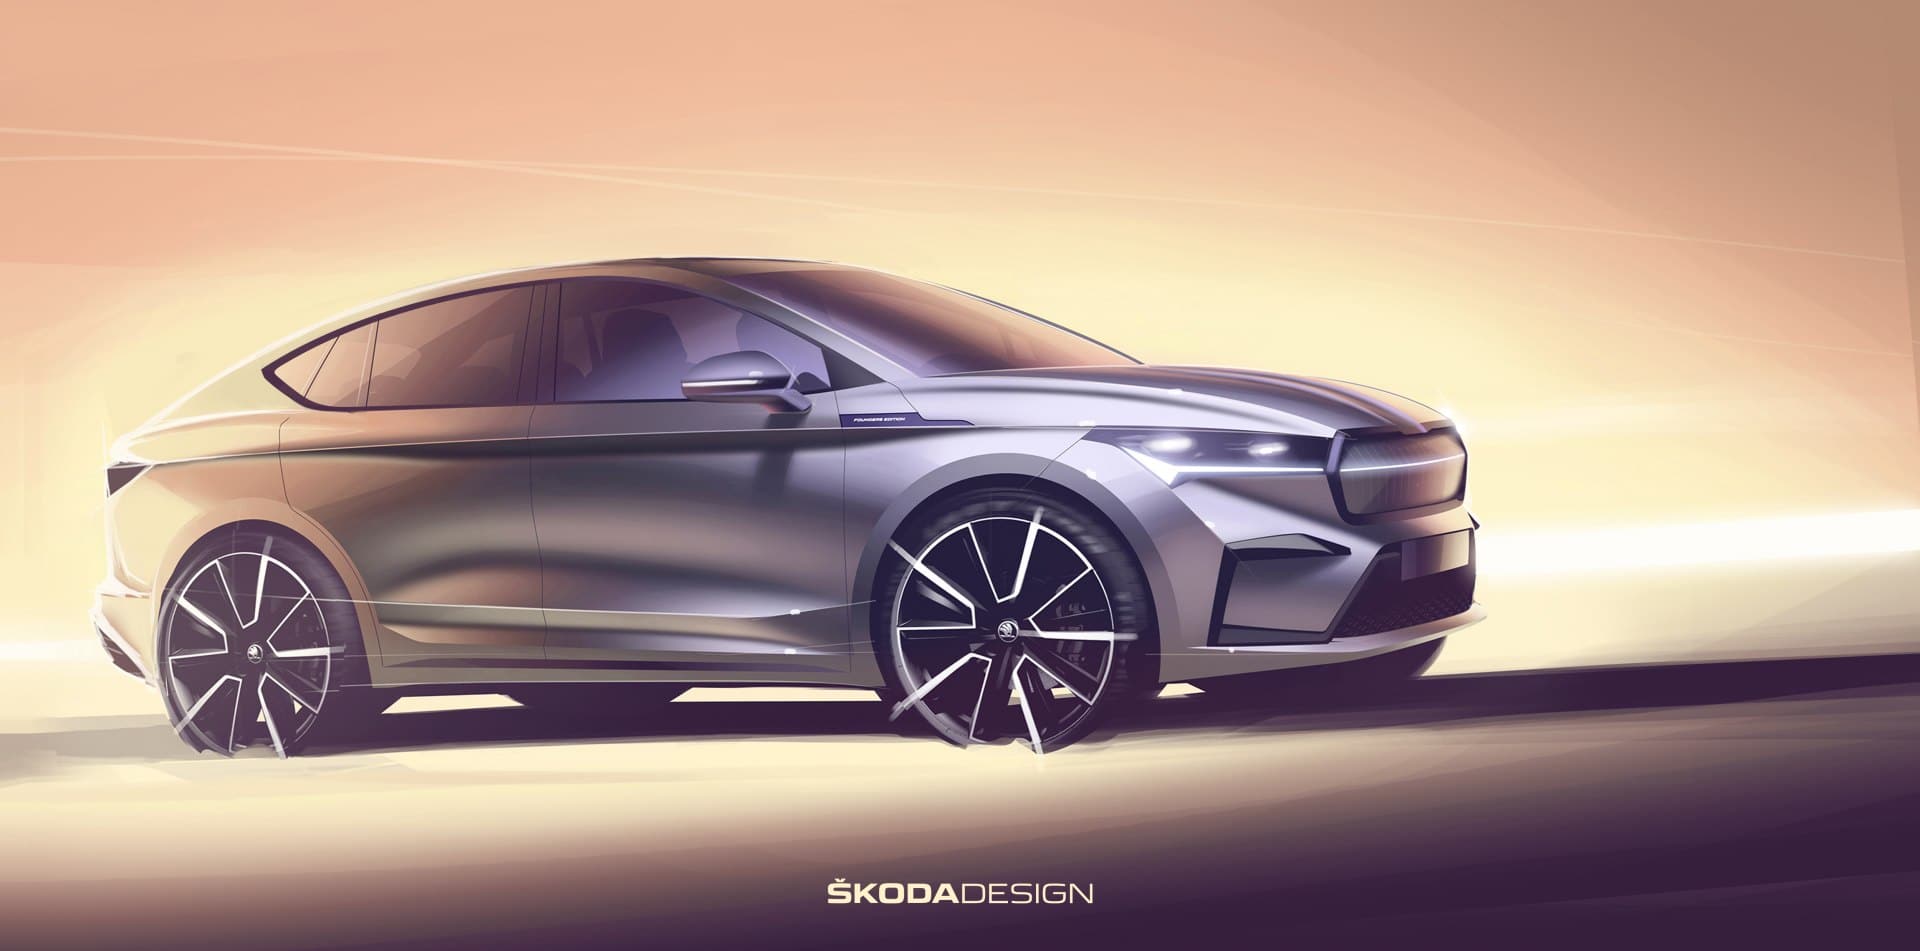 Design sketches offer a first glimpse of the new ŠKODA ENYAQ COUPÉ iV